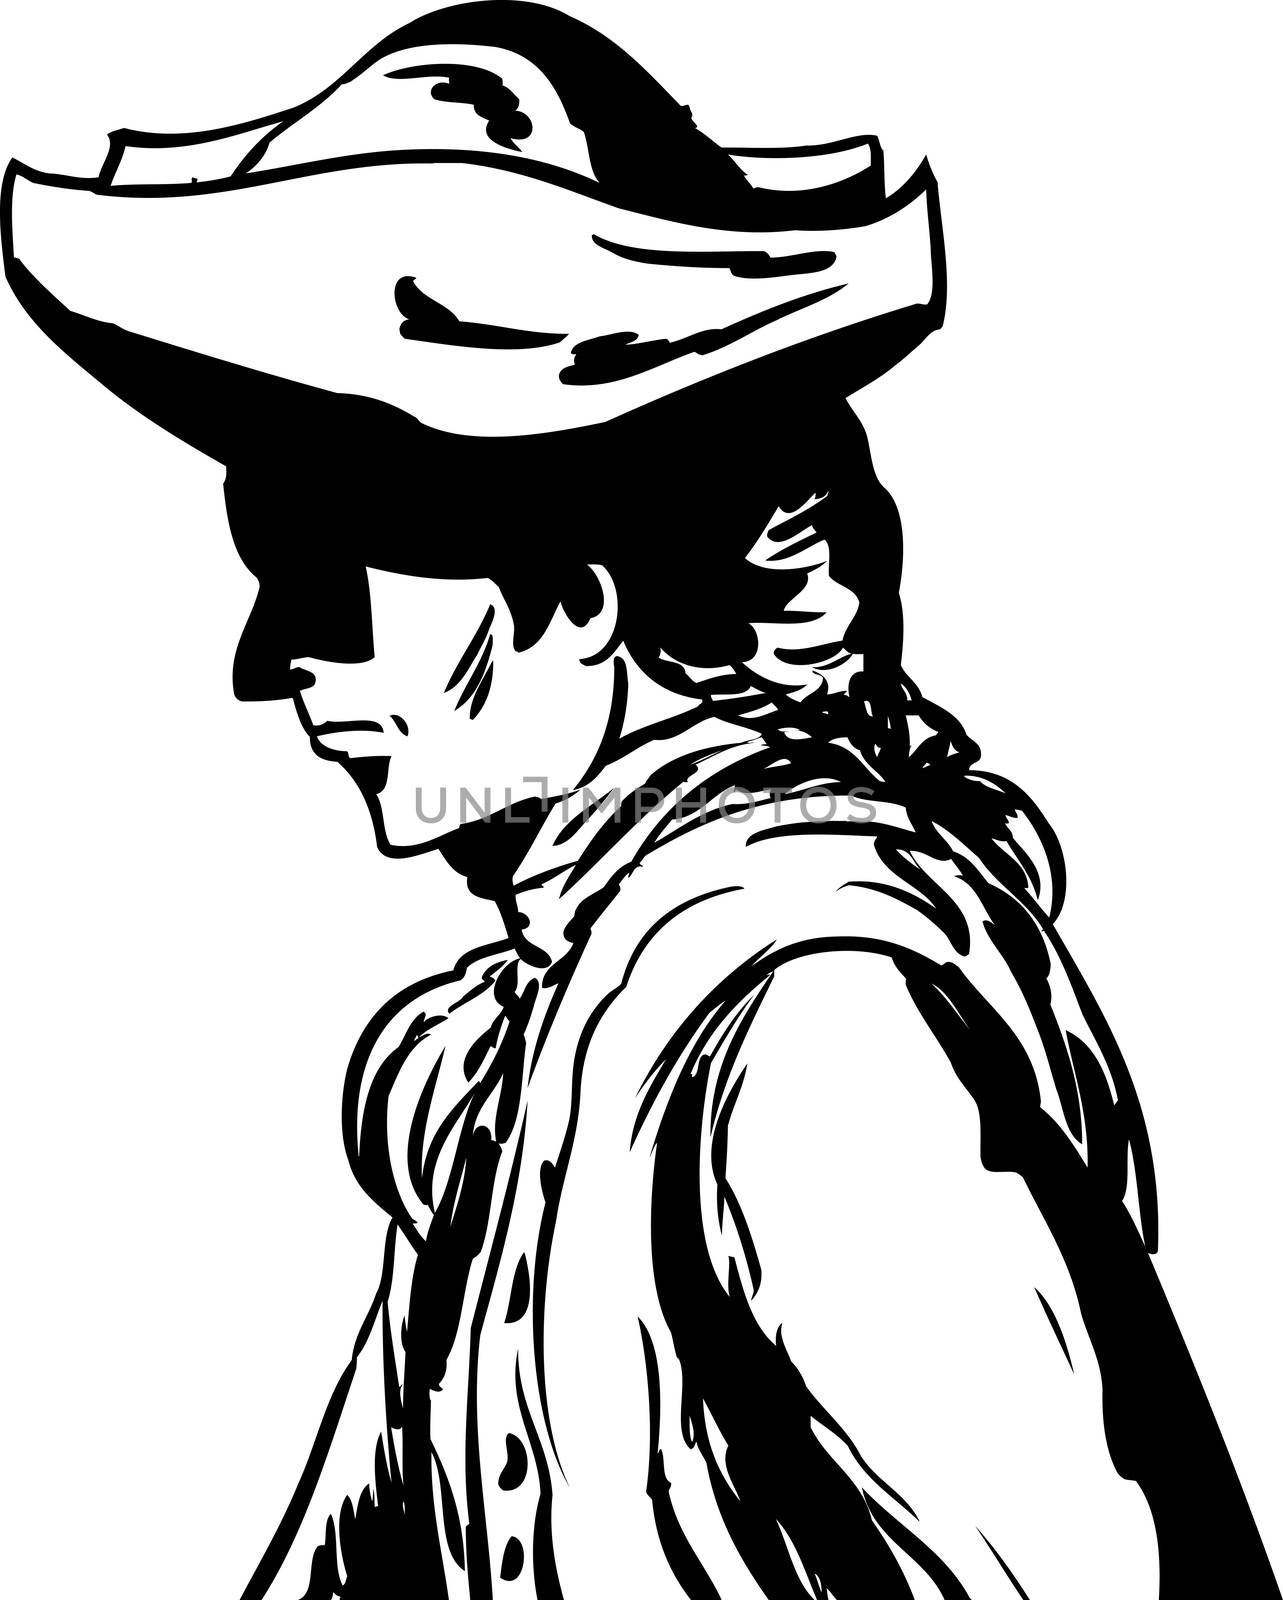 Outlined man in tricorn hat over white by TheBlackRhino